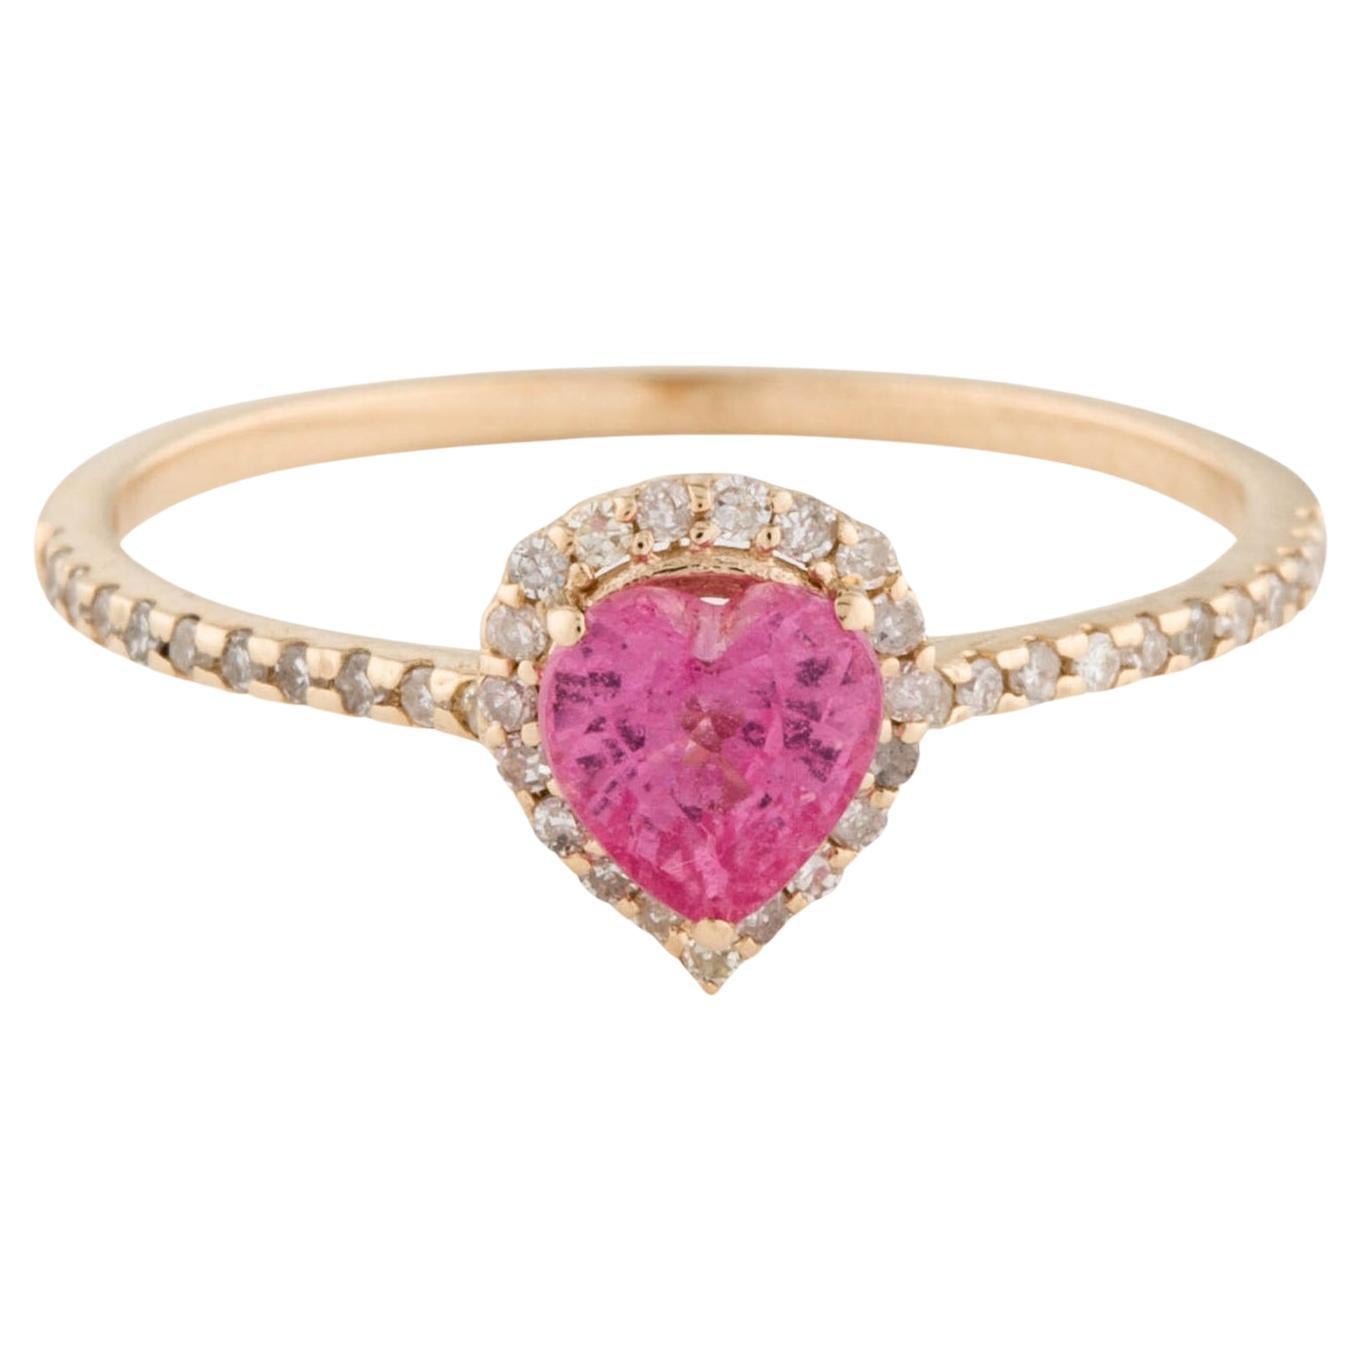 Gorgeous 14K Pink Sapphire & Diamond Cocktail Ring - Size 7  Elegant Jewelry For Sale